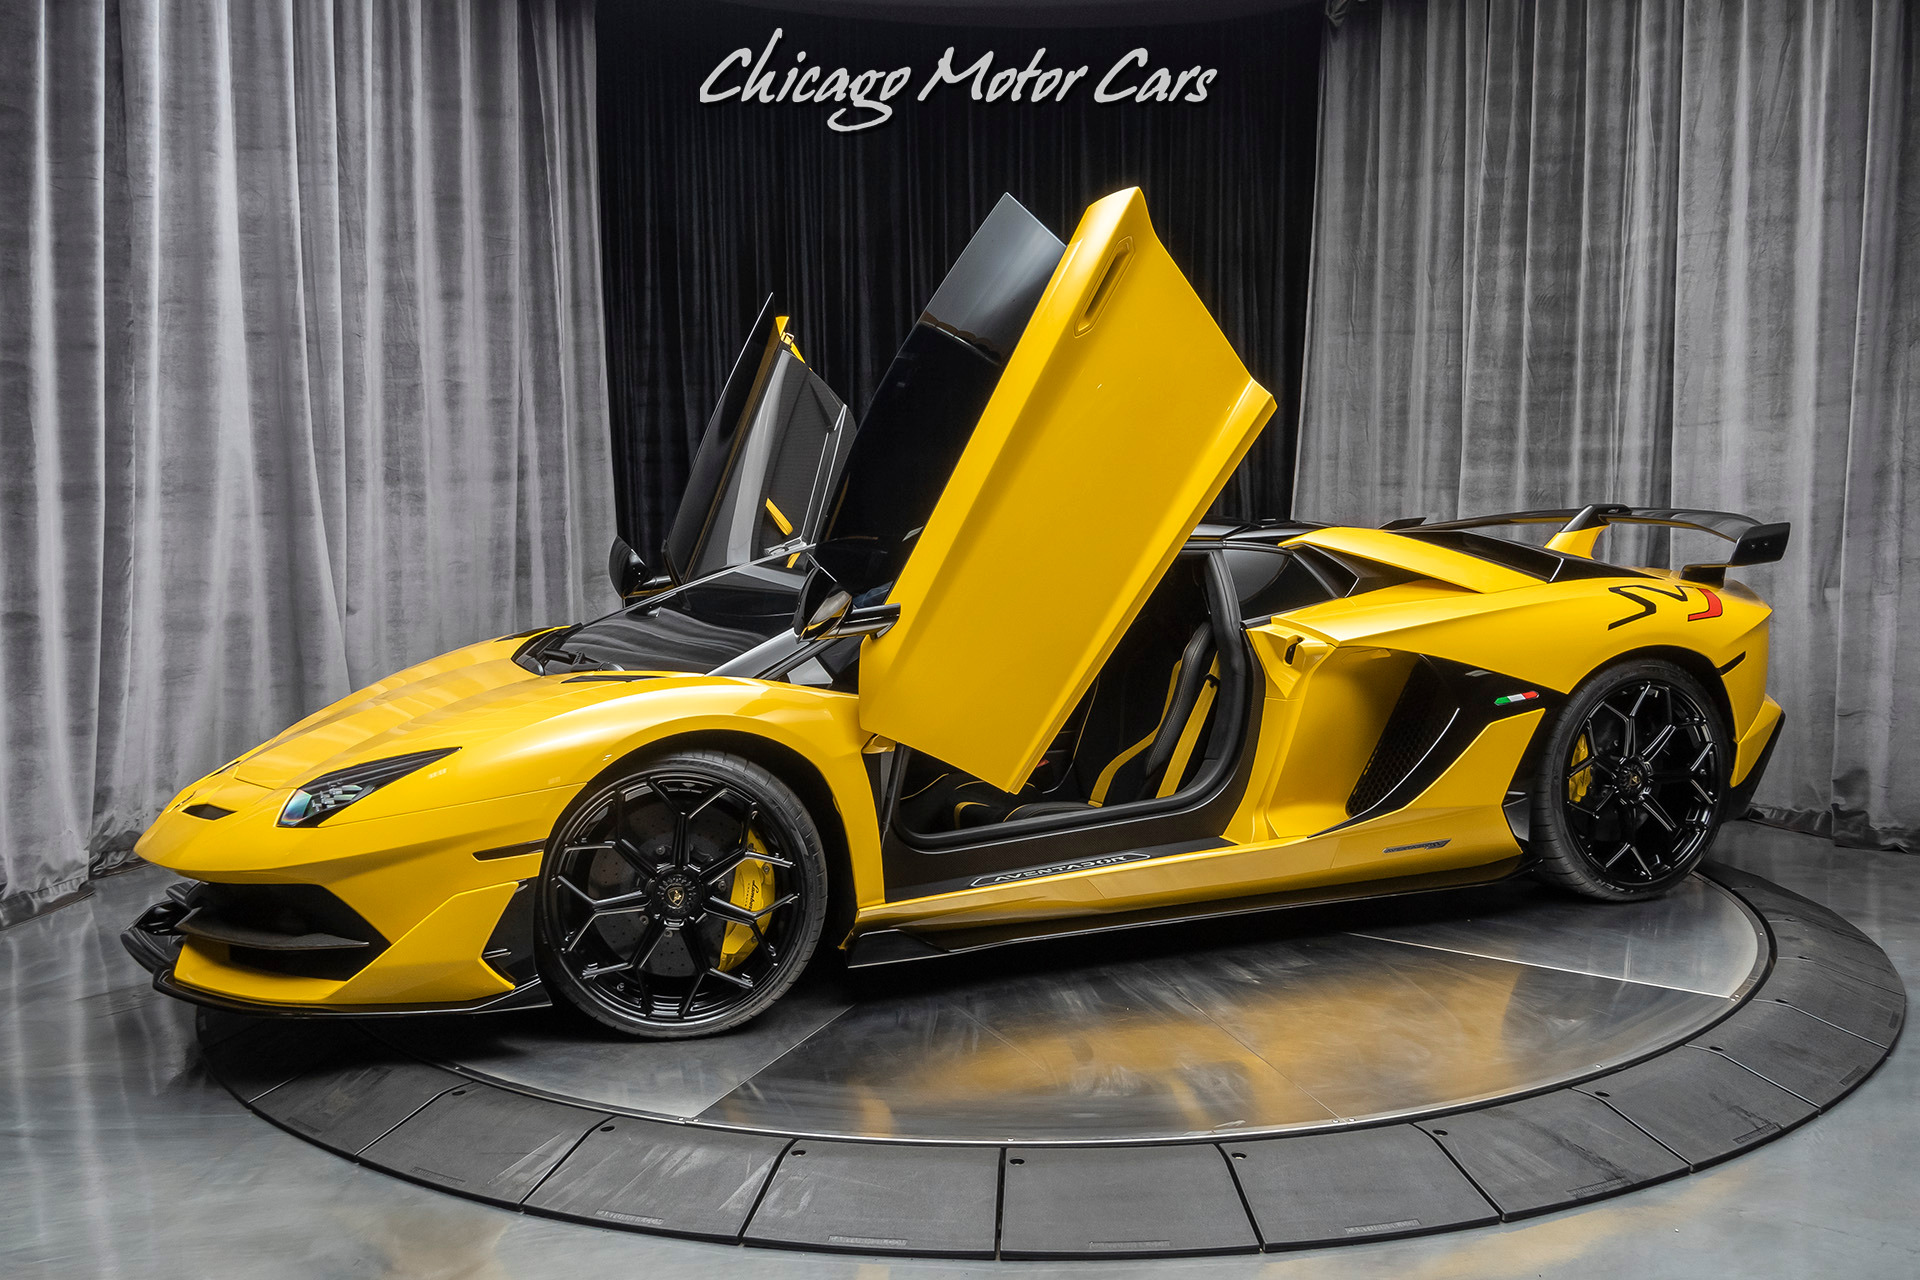 Used 2020 Lamborghini Aventador SVJ LP770-4 Roadster Only 1k Miles! New  Giallo Orion! RARE! PPF! For Sale (Special Pricing) | Chicago Motor Cars  Stock #18540